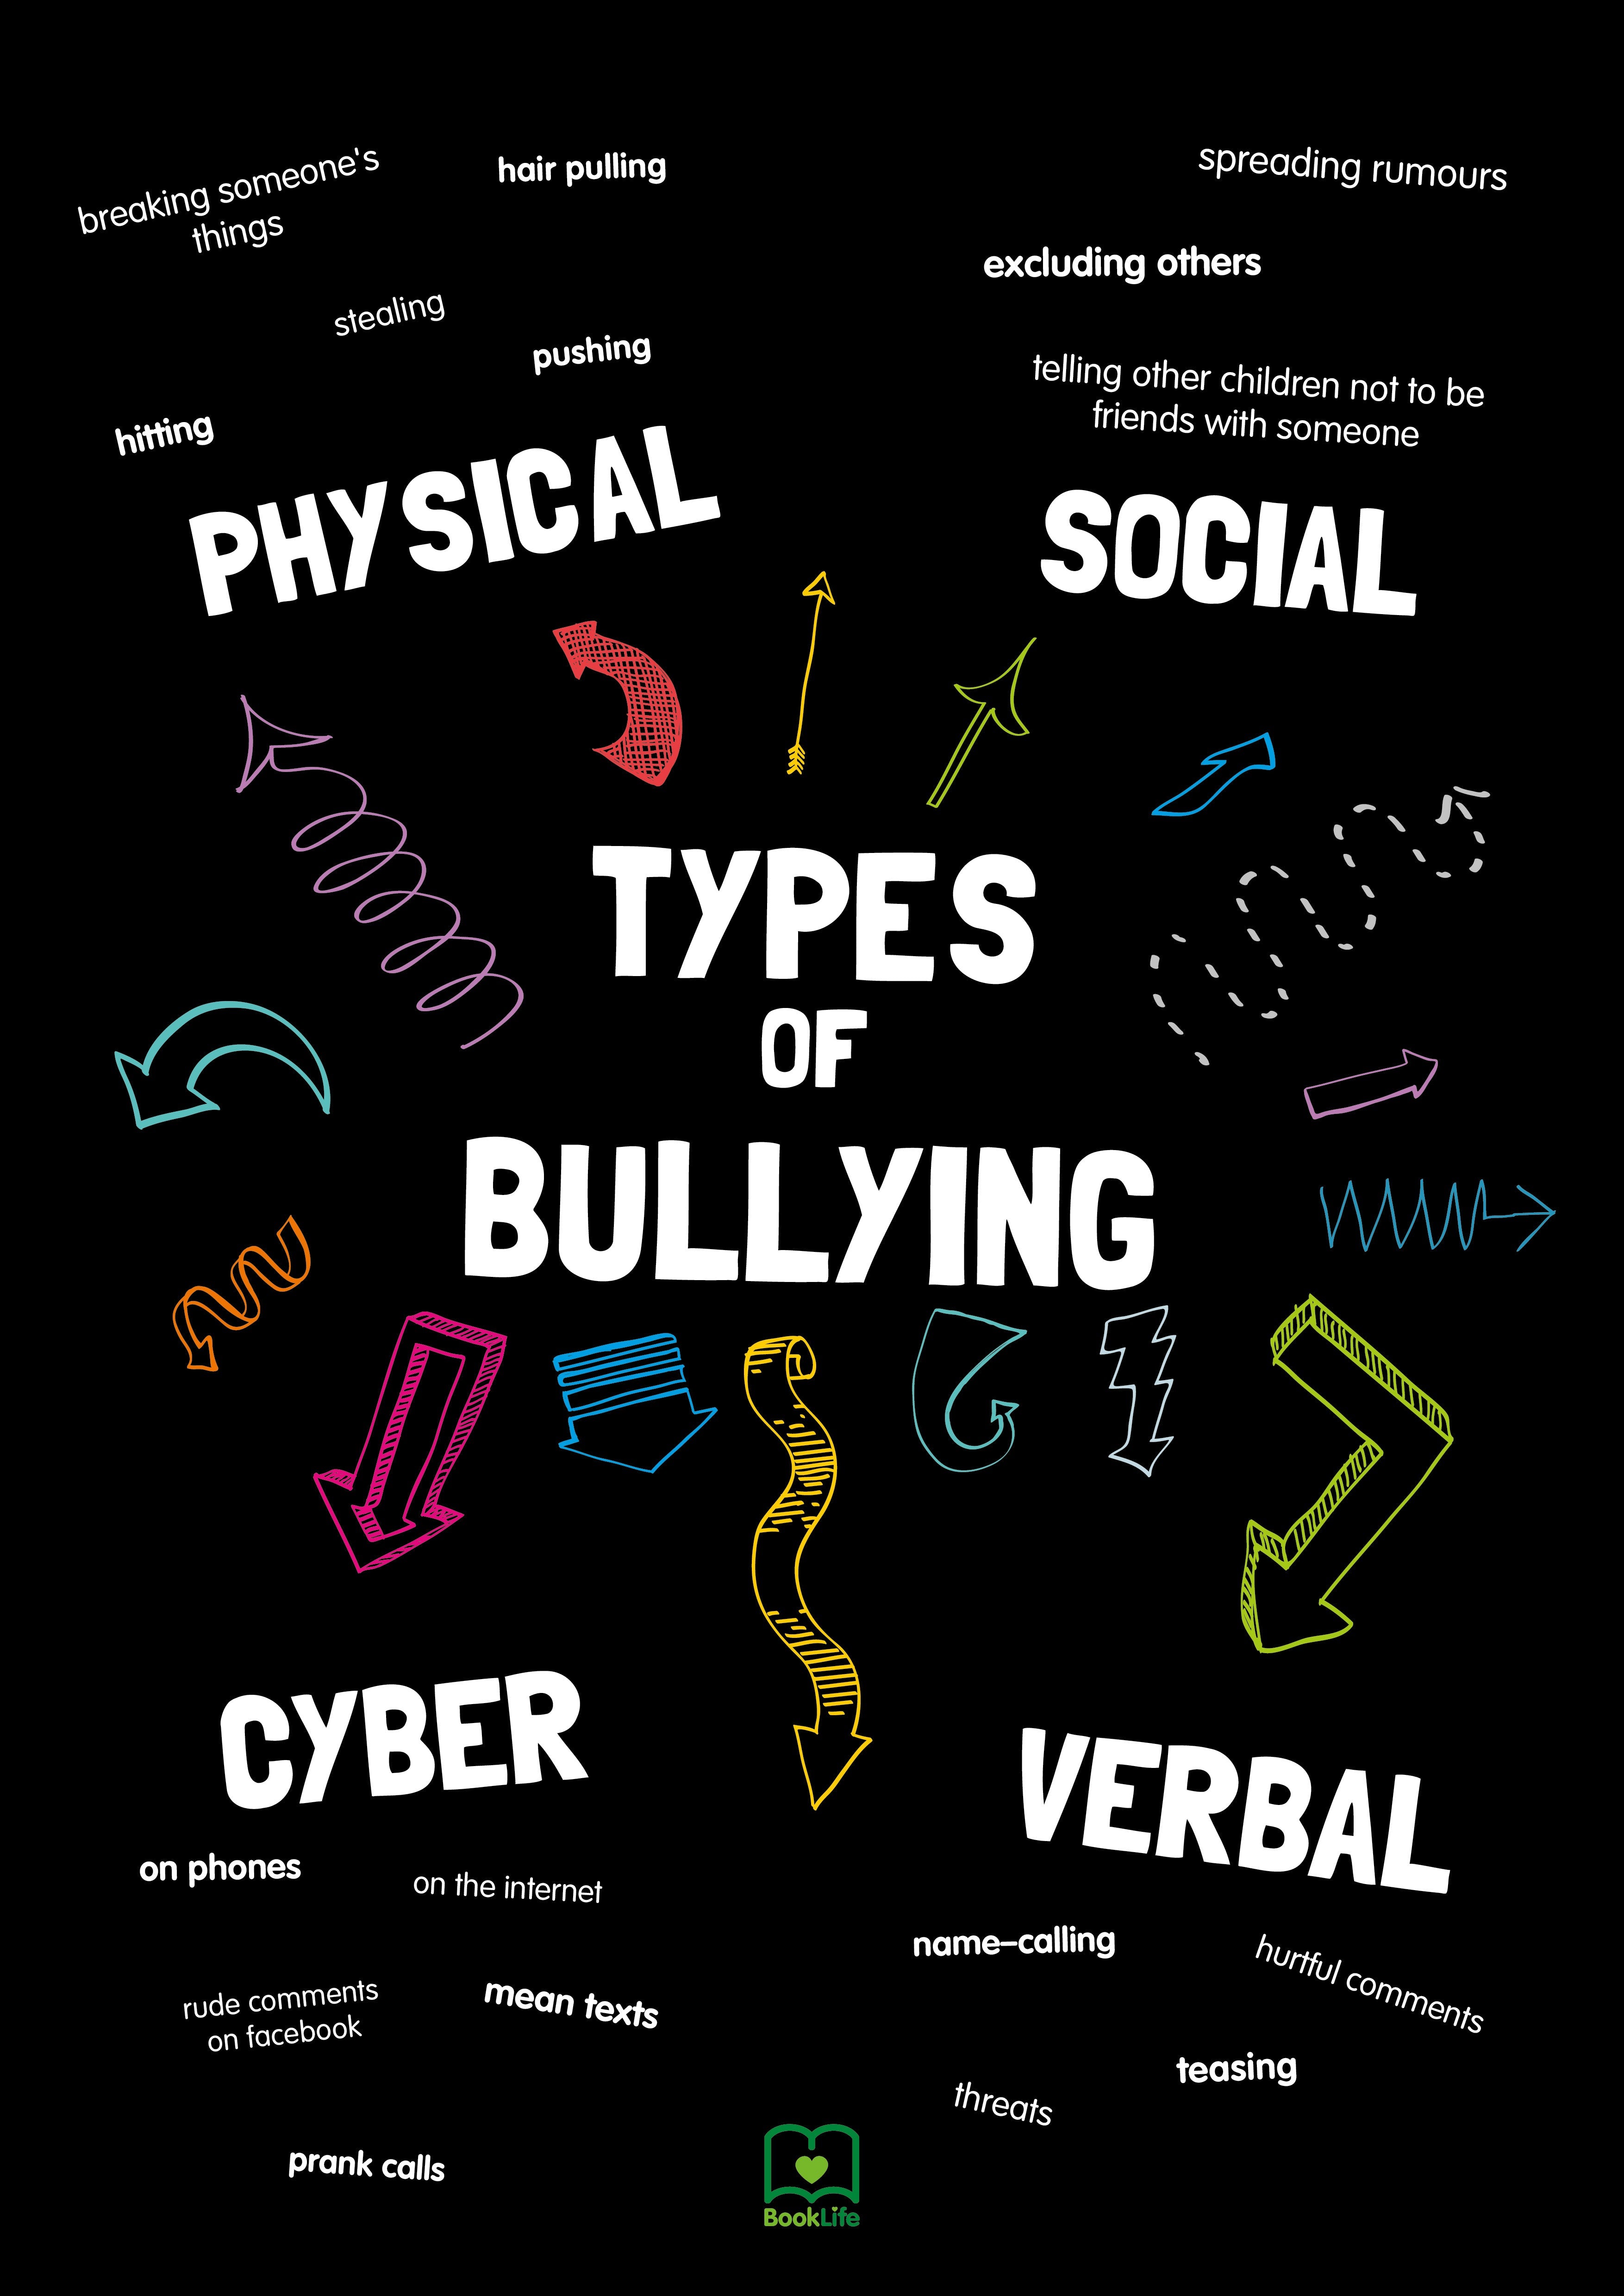 Free Types of Bullying Poster by BookLife